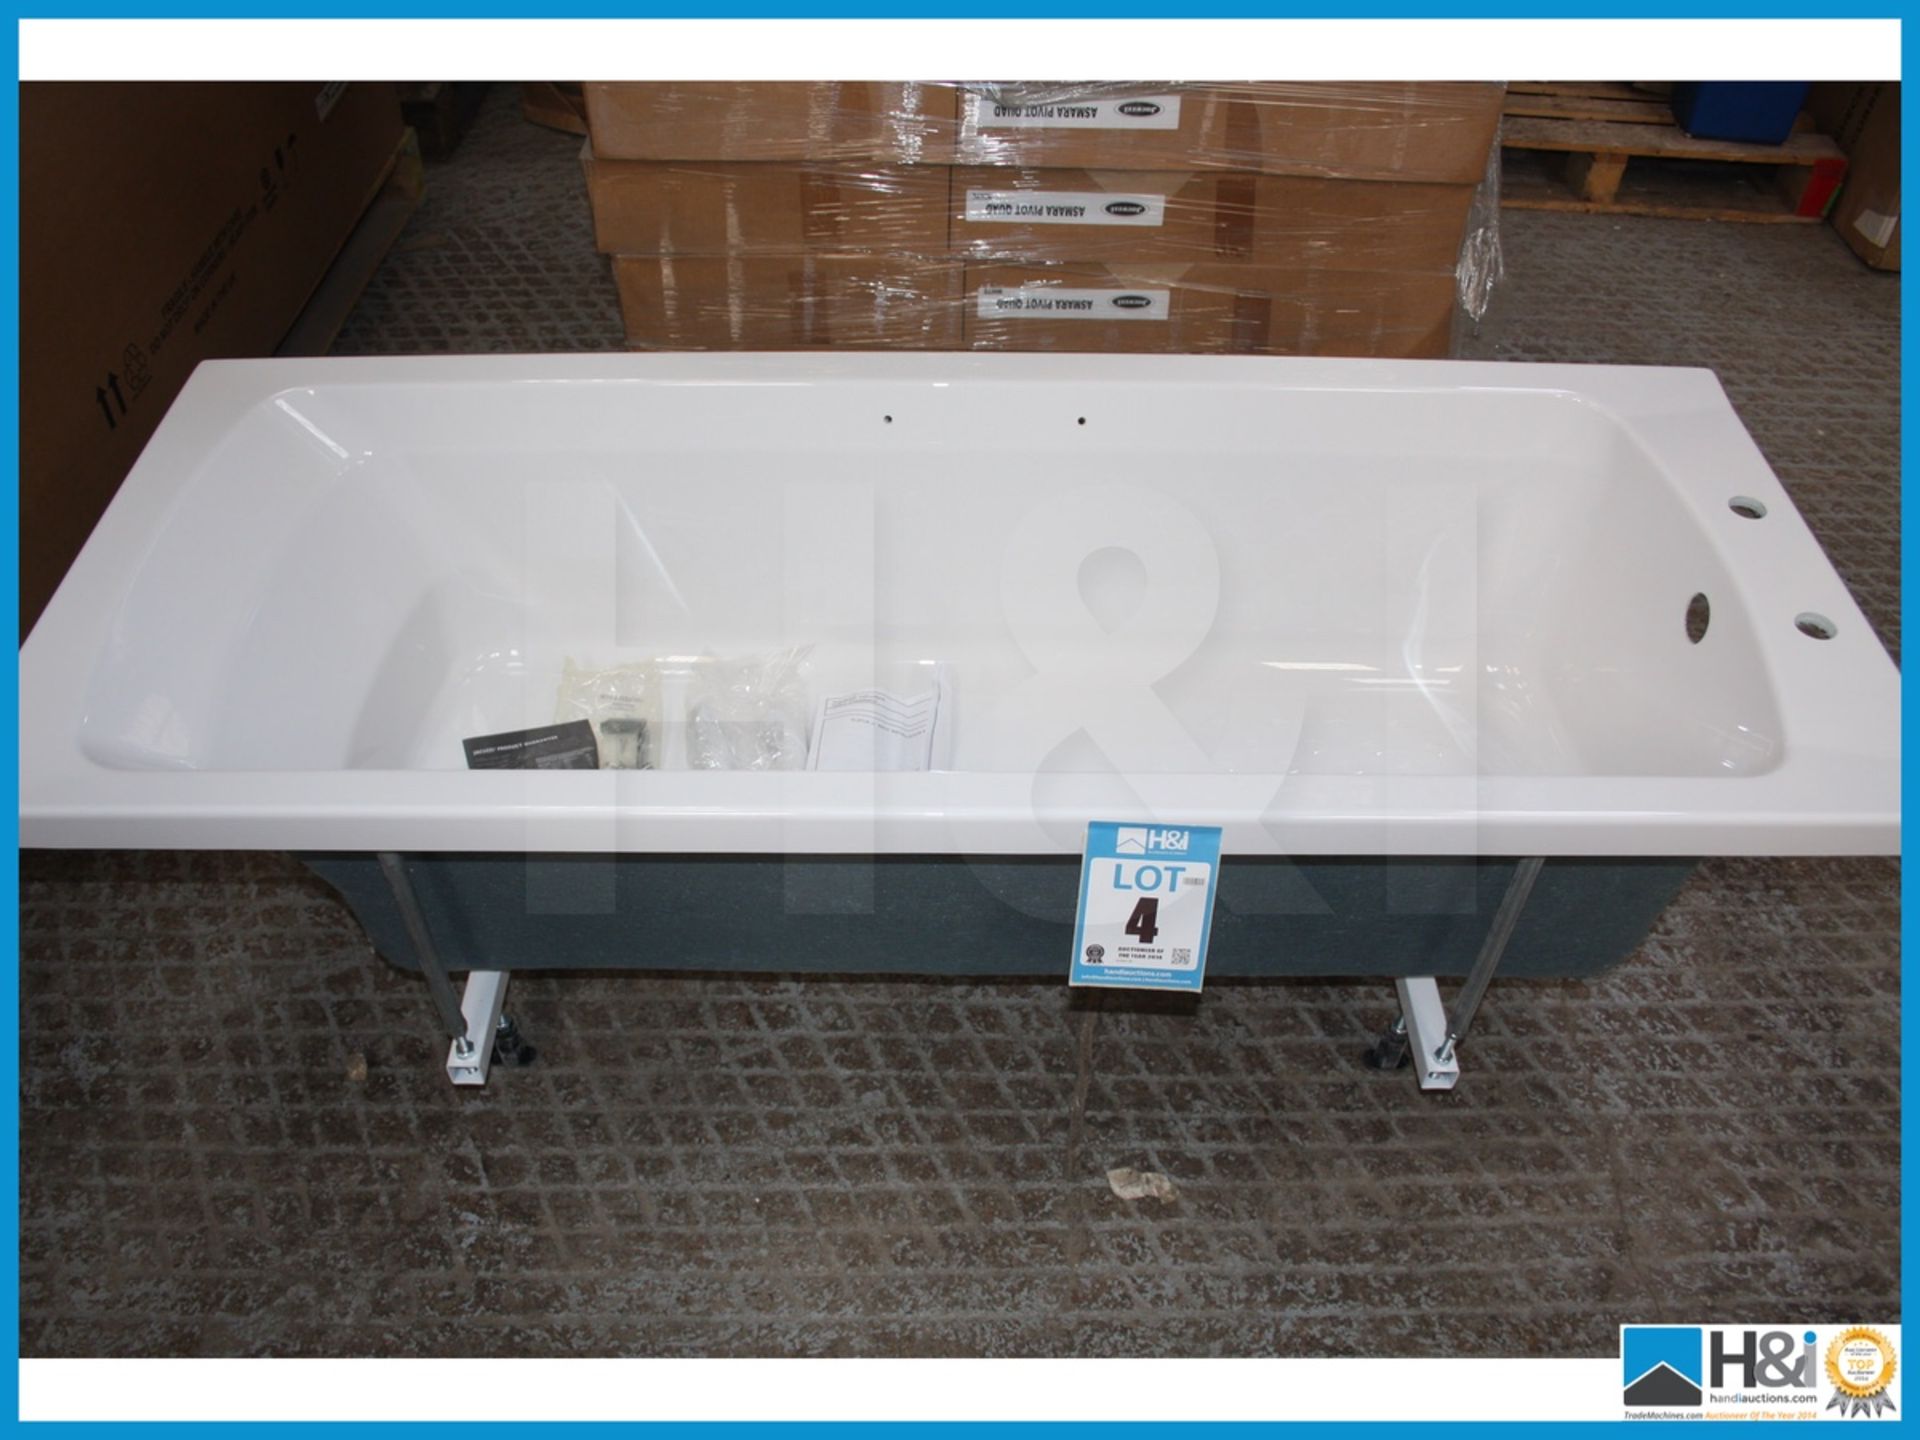 Jacuzzi elatus 1685 x 685 2 tap hole chrome grips new boxed rrp œ899 Appraisal: Viewing Essential